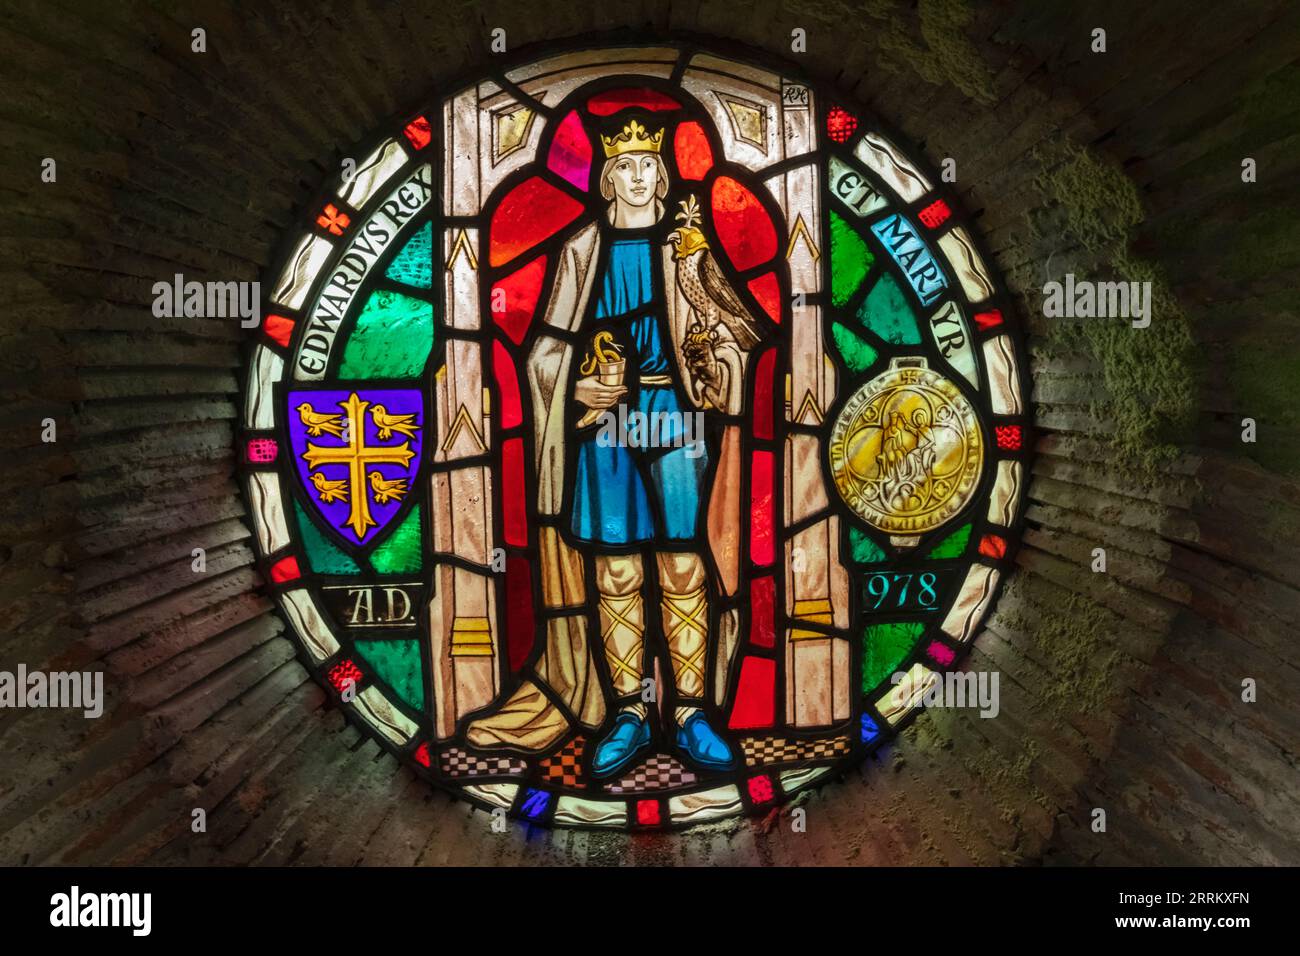 England, Dorset, Shaftesbury, Shaftesbury Abbey, Abbey Museum, Stained Glass Window depicting King Edward by Rupert Moore Stock Photo